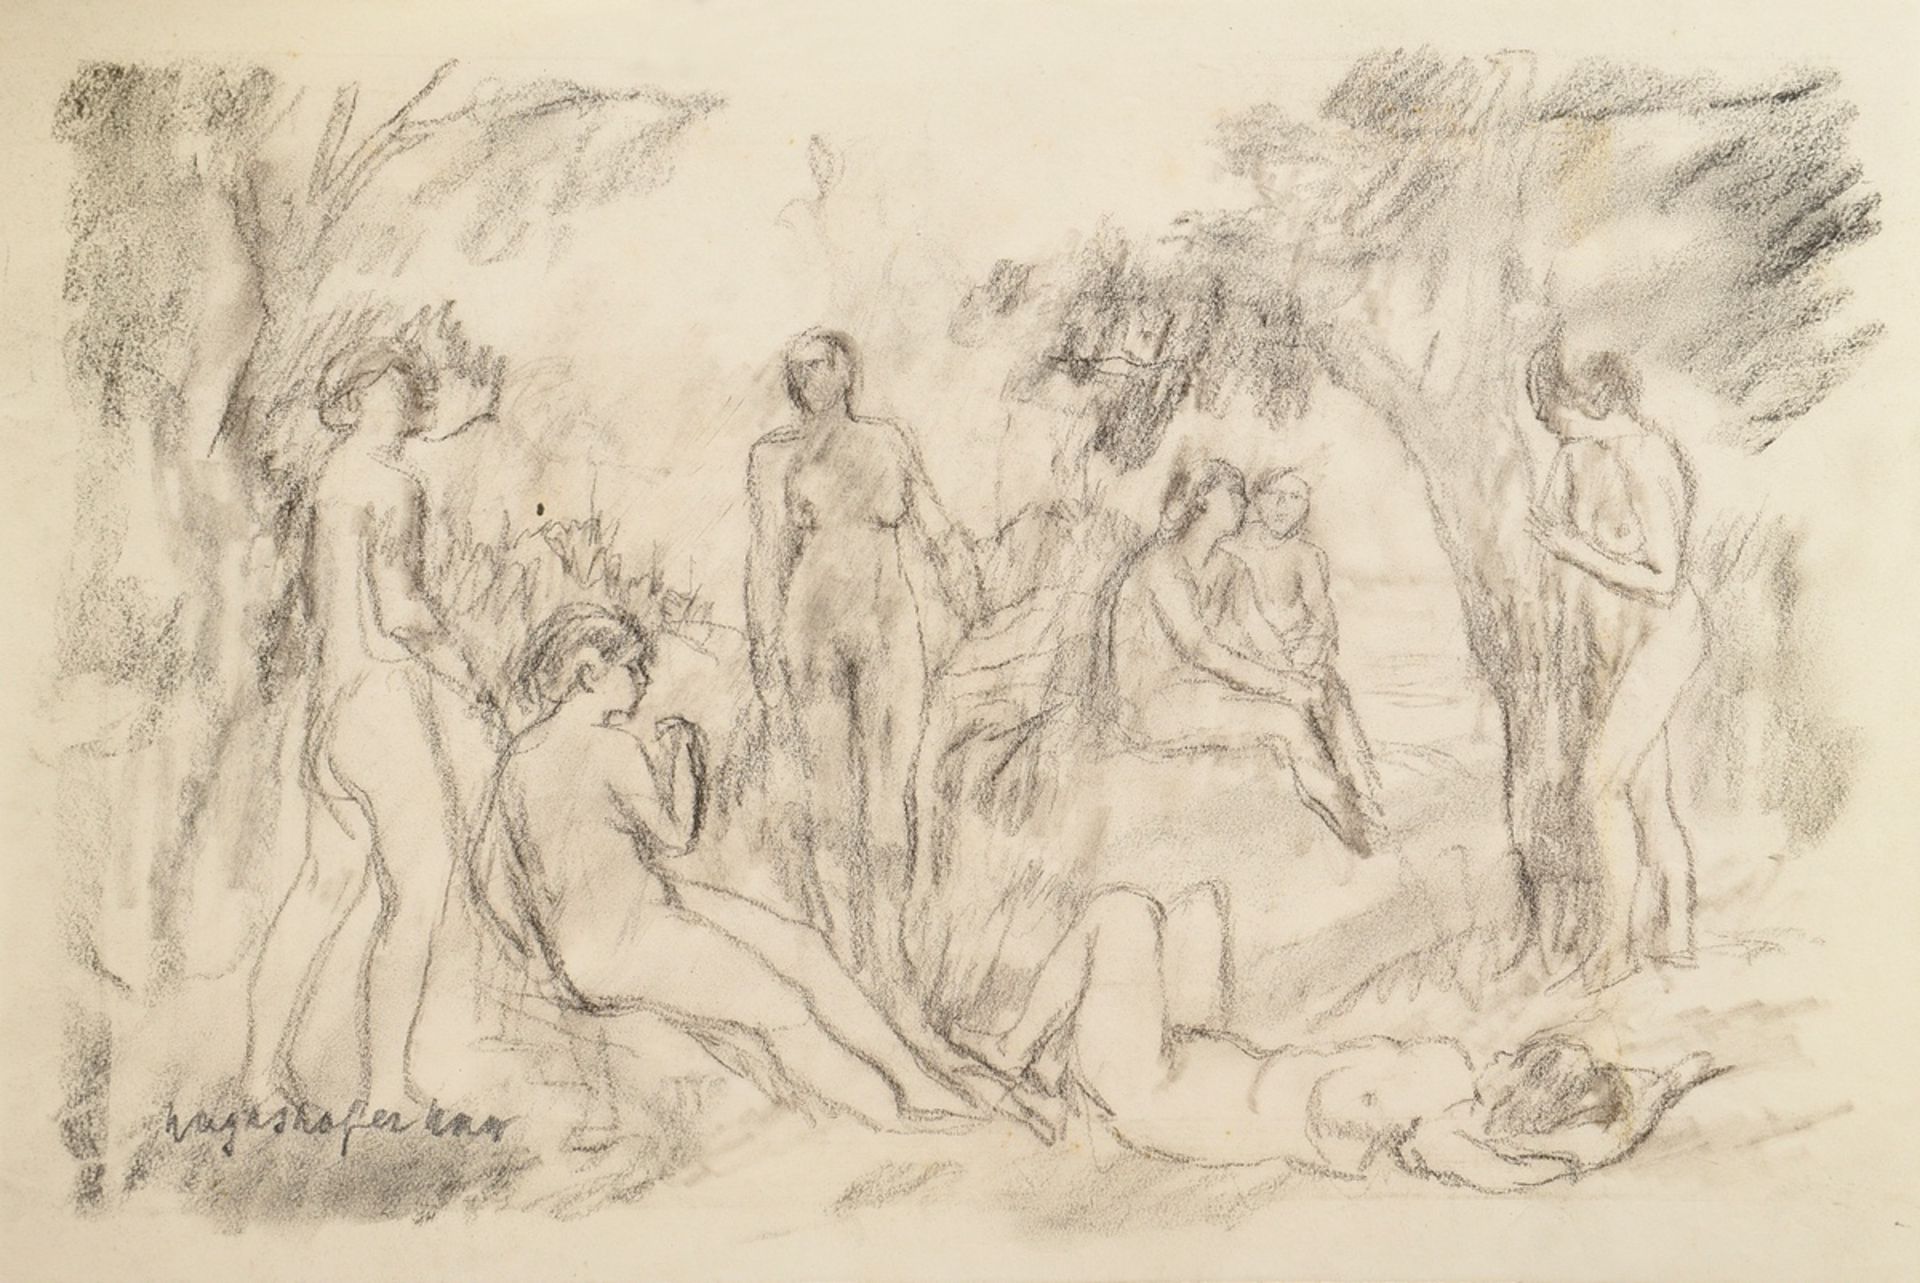 17 Mayershofer, Max (1875-1950) "Female nude drawings", charcoal, each sign., each mounted in passe - Image 4 of 19